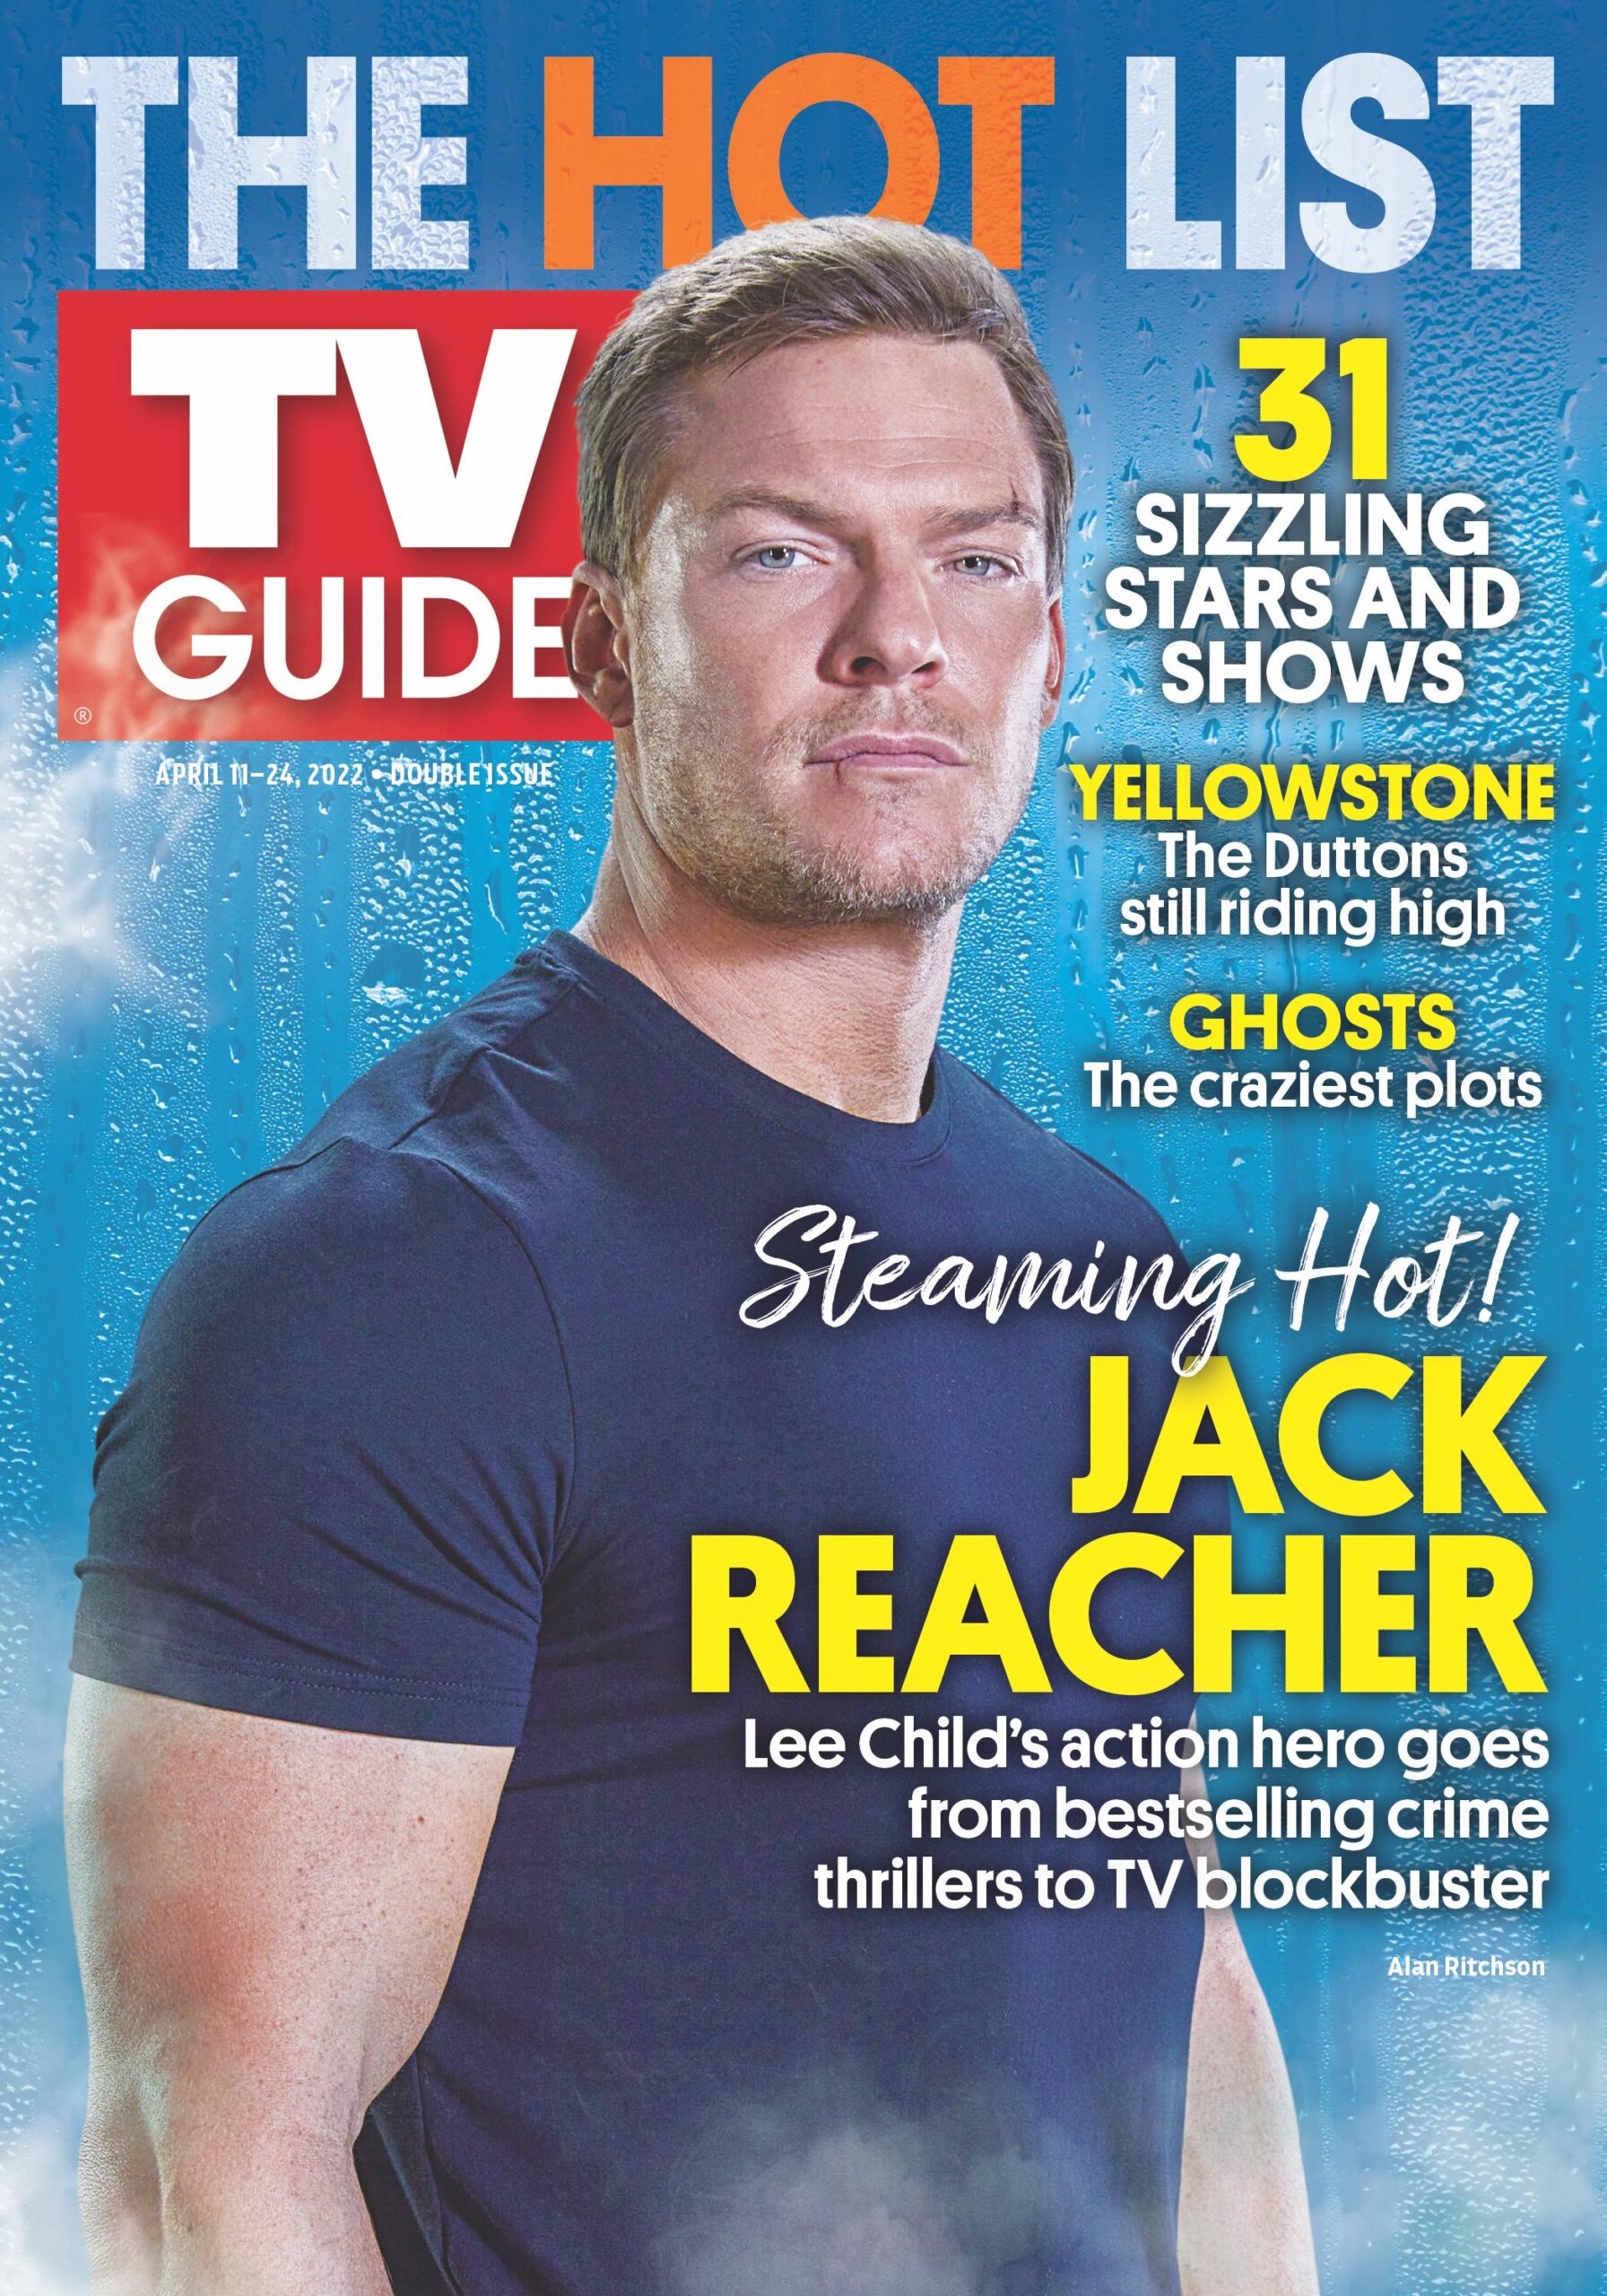 THE HOT LIST GUIDE; SIZZLING STARS AND SHOWS; YELLOWSTONE: The Duttons still riding high; GHOSTS: The craziest plots; Steaming Hot! JACK REACHER: Lee Child's action hero goes from bestselling crime thrillers to TV blockbuster